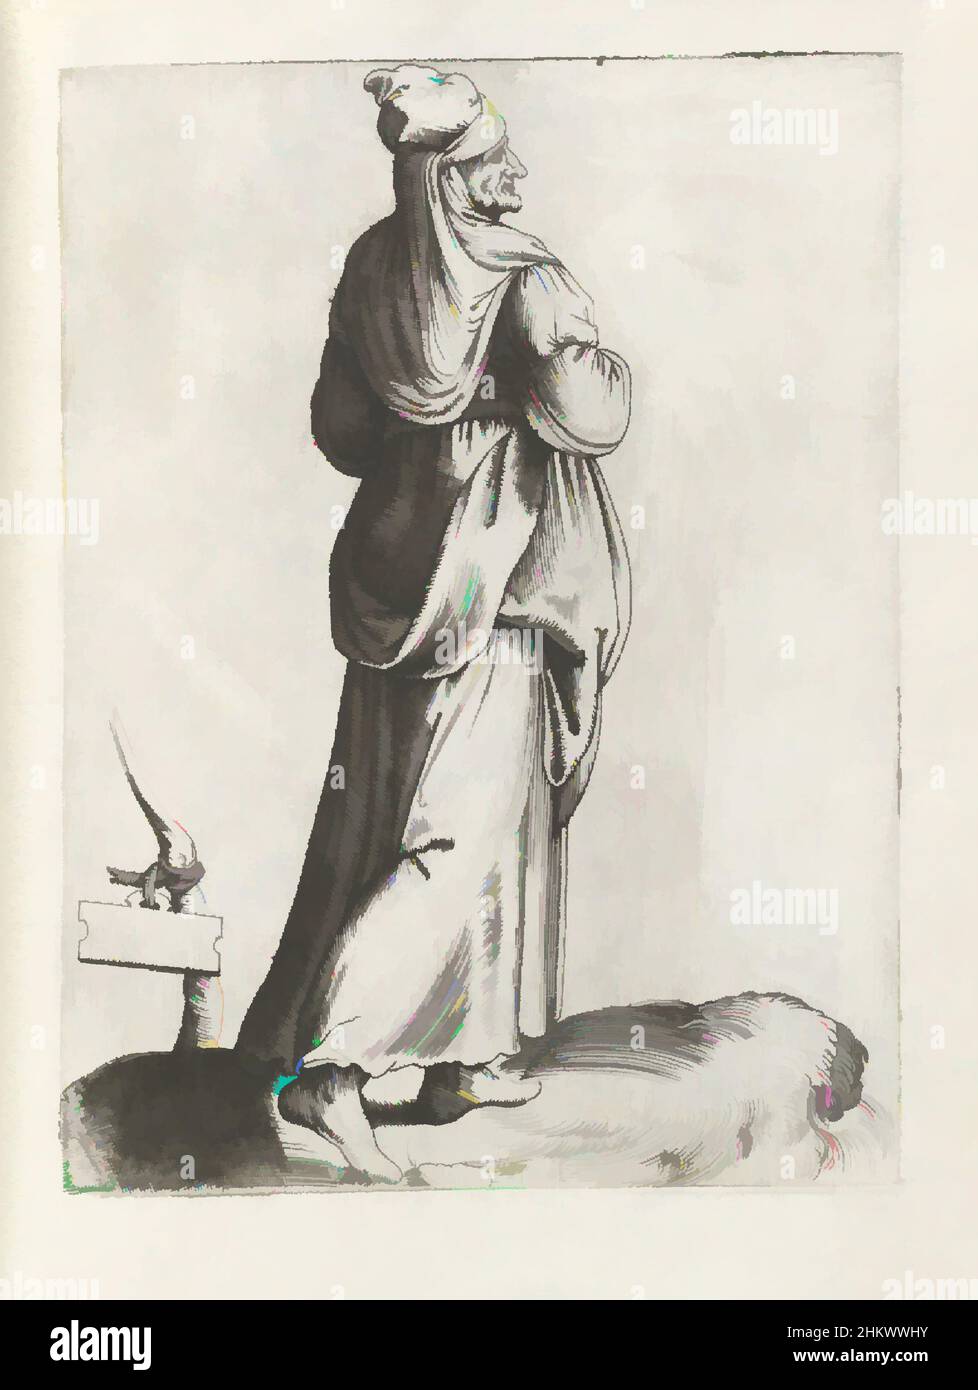 Art inspired by Spanish peasant woman, Diversarum gentium nostrae aetatis habitus (series title), Spanish peasant woman (Hispania rustica), to the right. Untitled print from album 'Diversarum gentium nostrae aetatis habitus'., print maker: Enea Vico, Venice, in or before 1558, paper, Classic works modernized by Artotop with a splash of modernity. Shapes, color and value, eye-catching visual impact on art. Emotions through freedom of artworks in a contemporary way. A timeless message pursuing a wildly creative new direction. Artists turning to the digital medium and creating the Artotop NFT Stock Photo